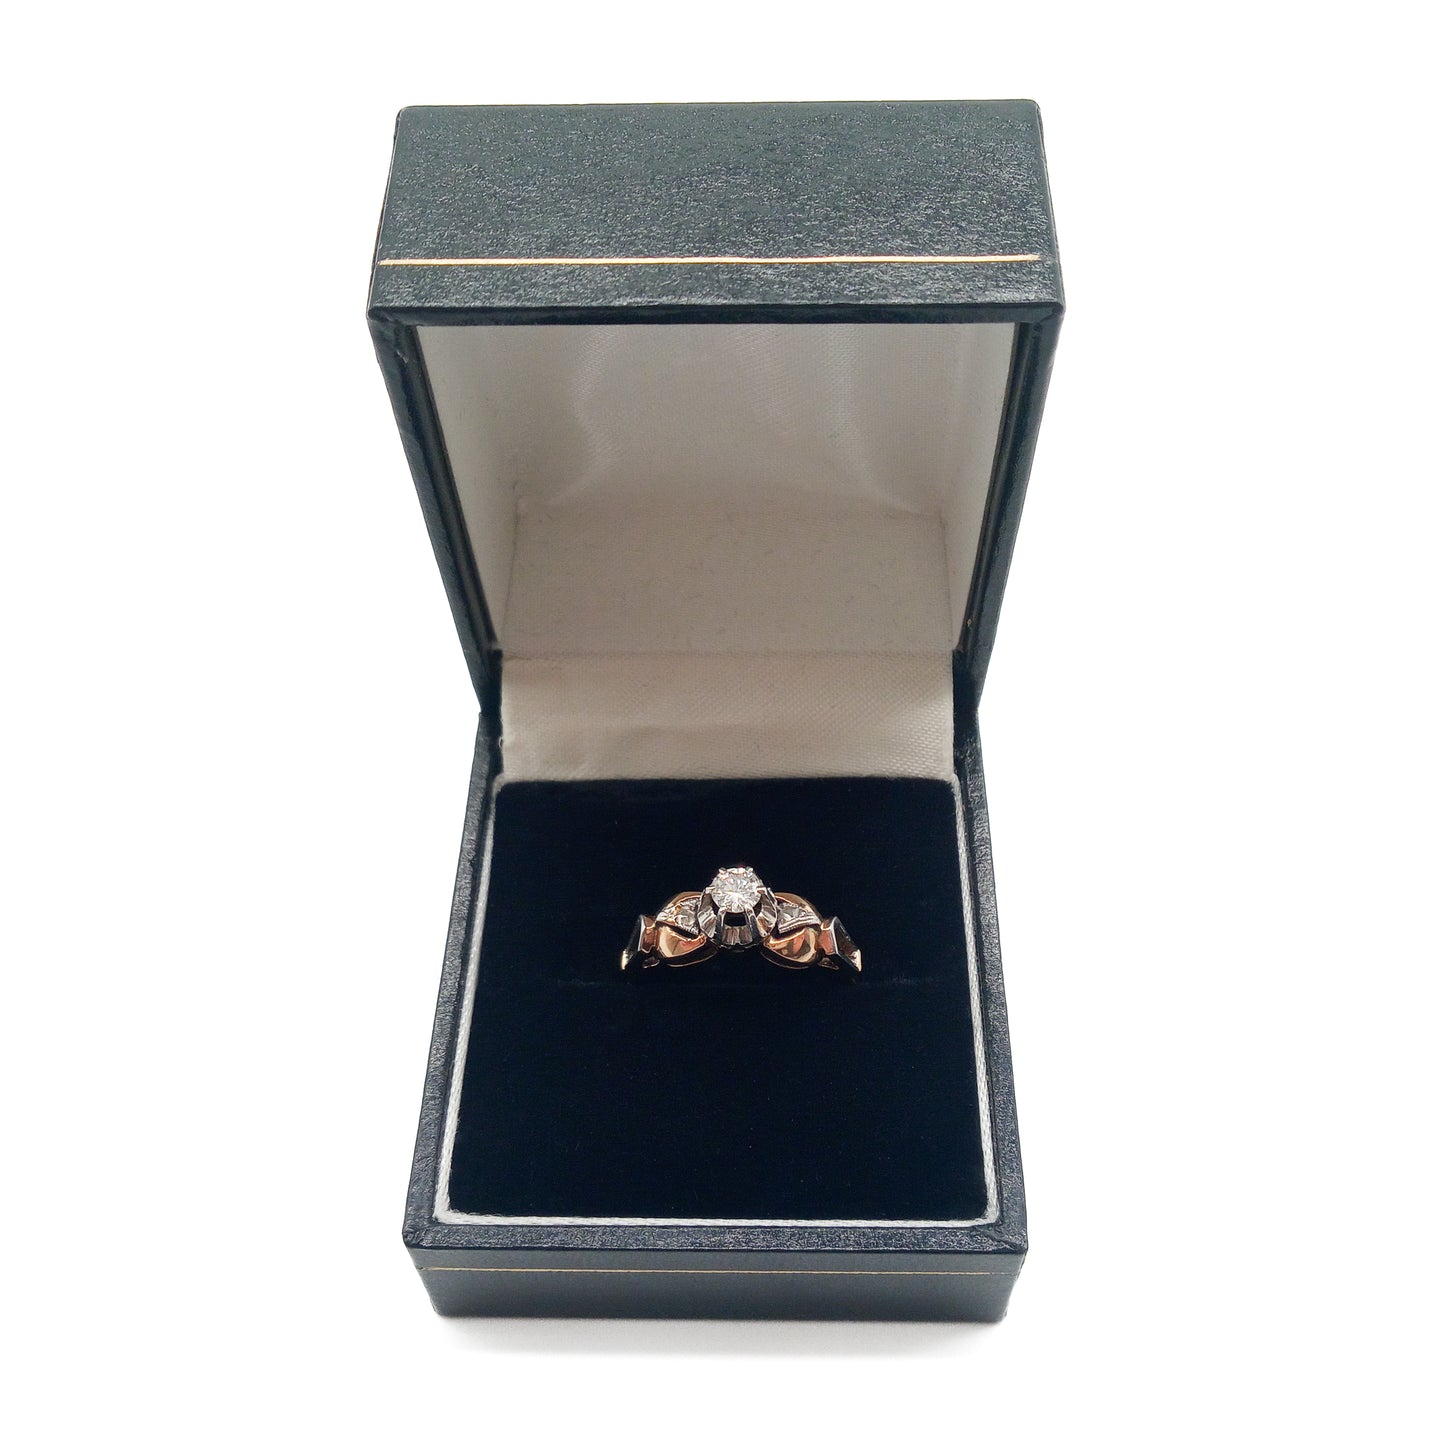 Pretty 18ct rose and white gold ring set with an old-cut diamond. Argentina